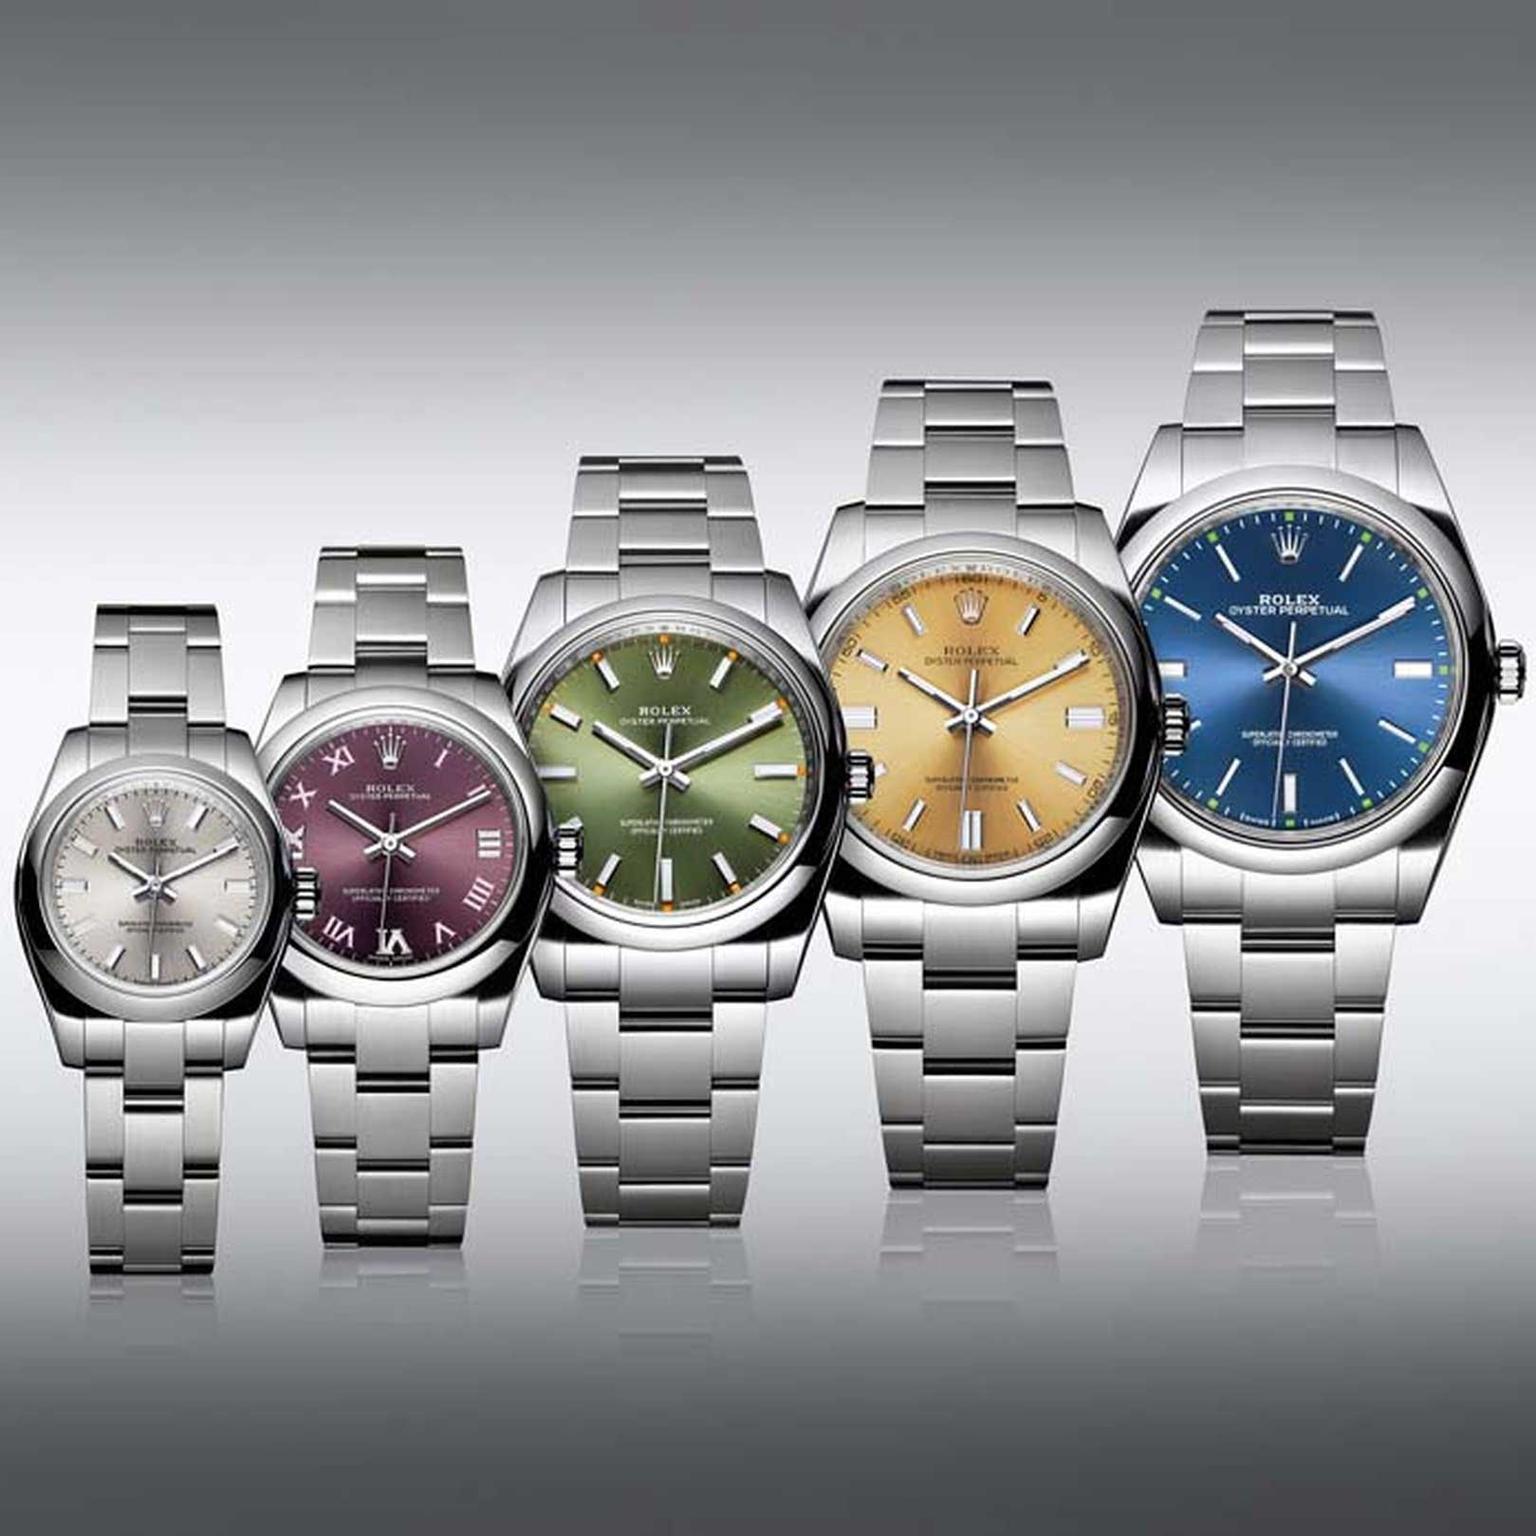 Rolex Oyster Perpetual watches